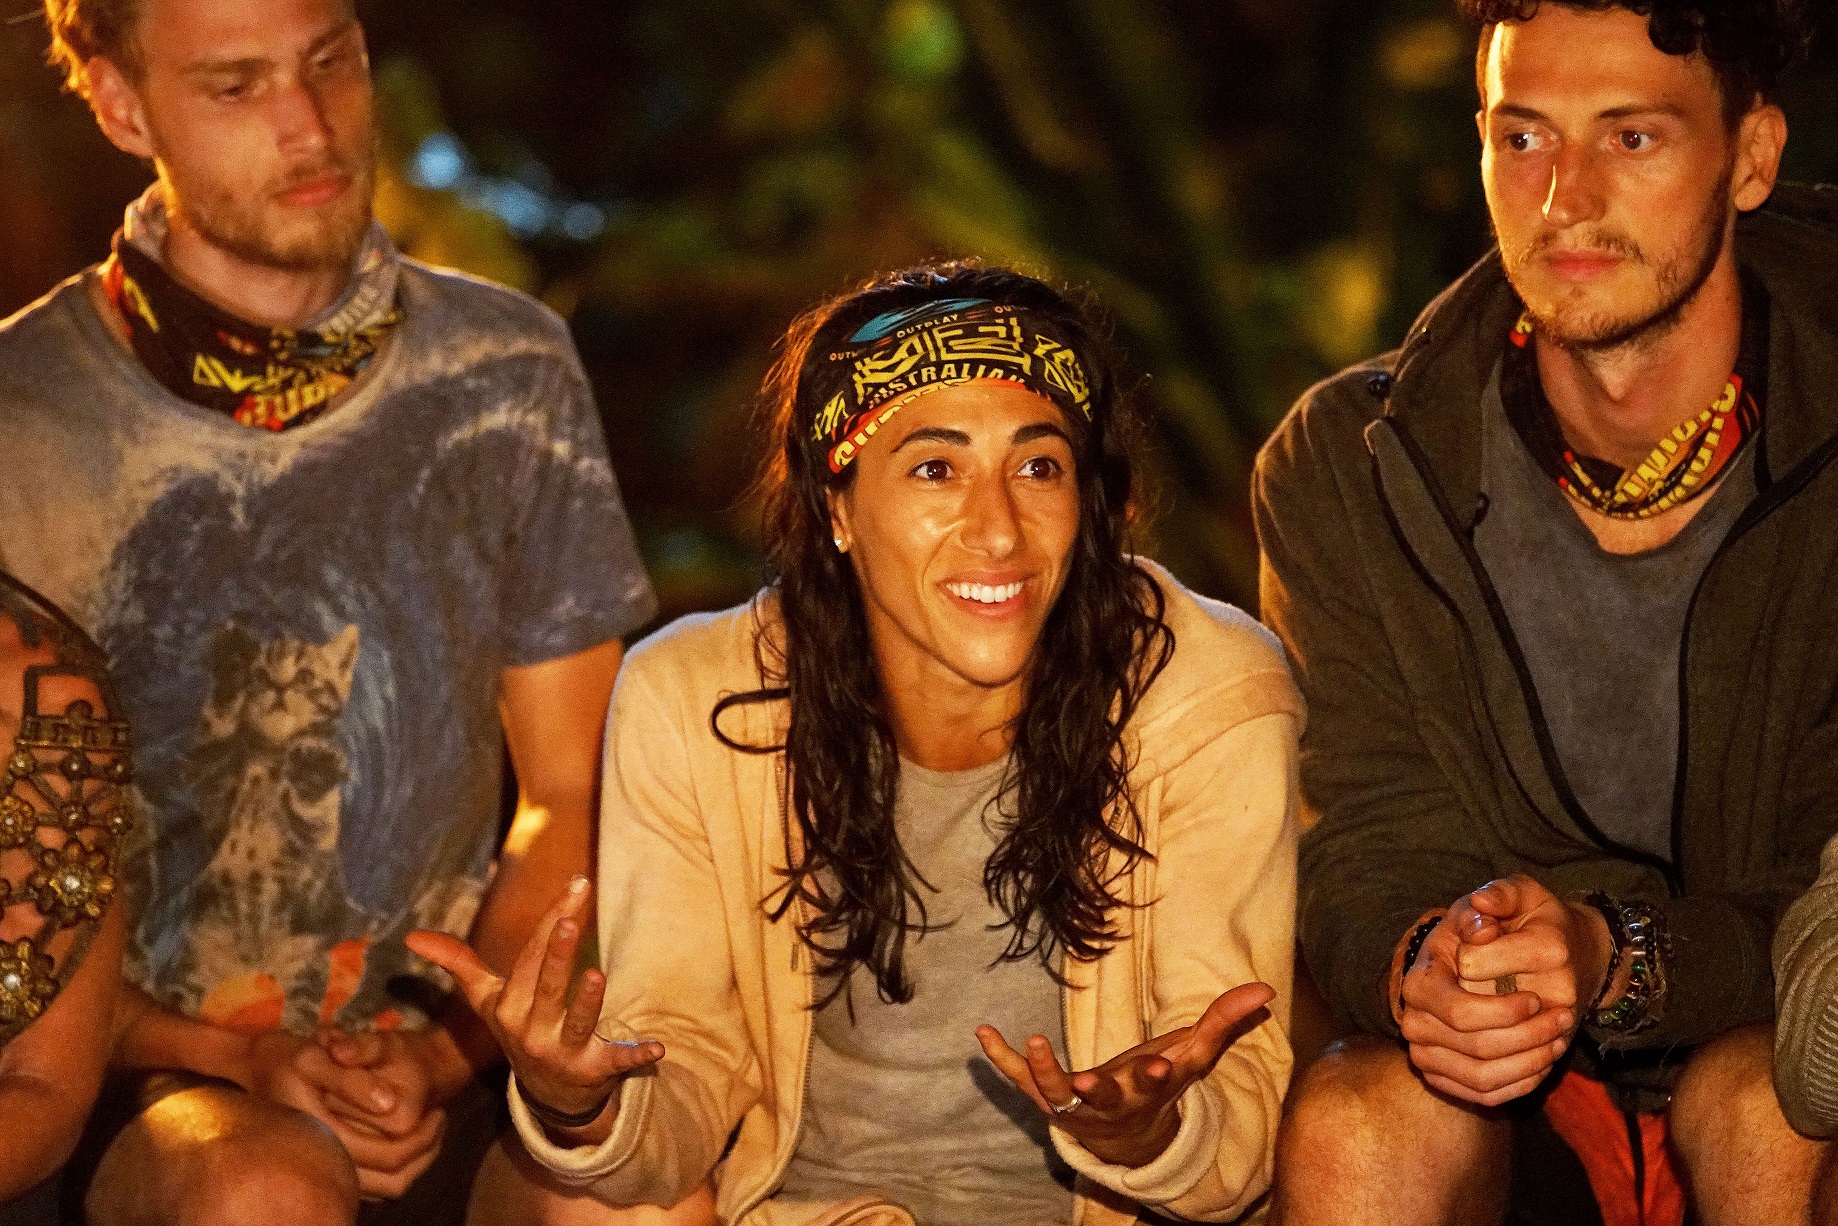 Australian Survivor’s Lydia Lassila blindsided in first tribal council since the merge